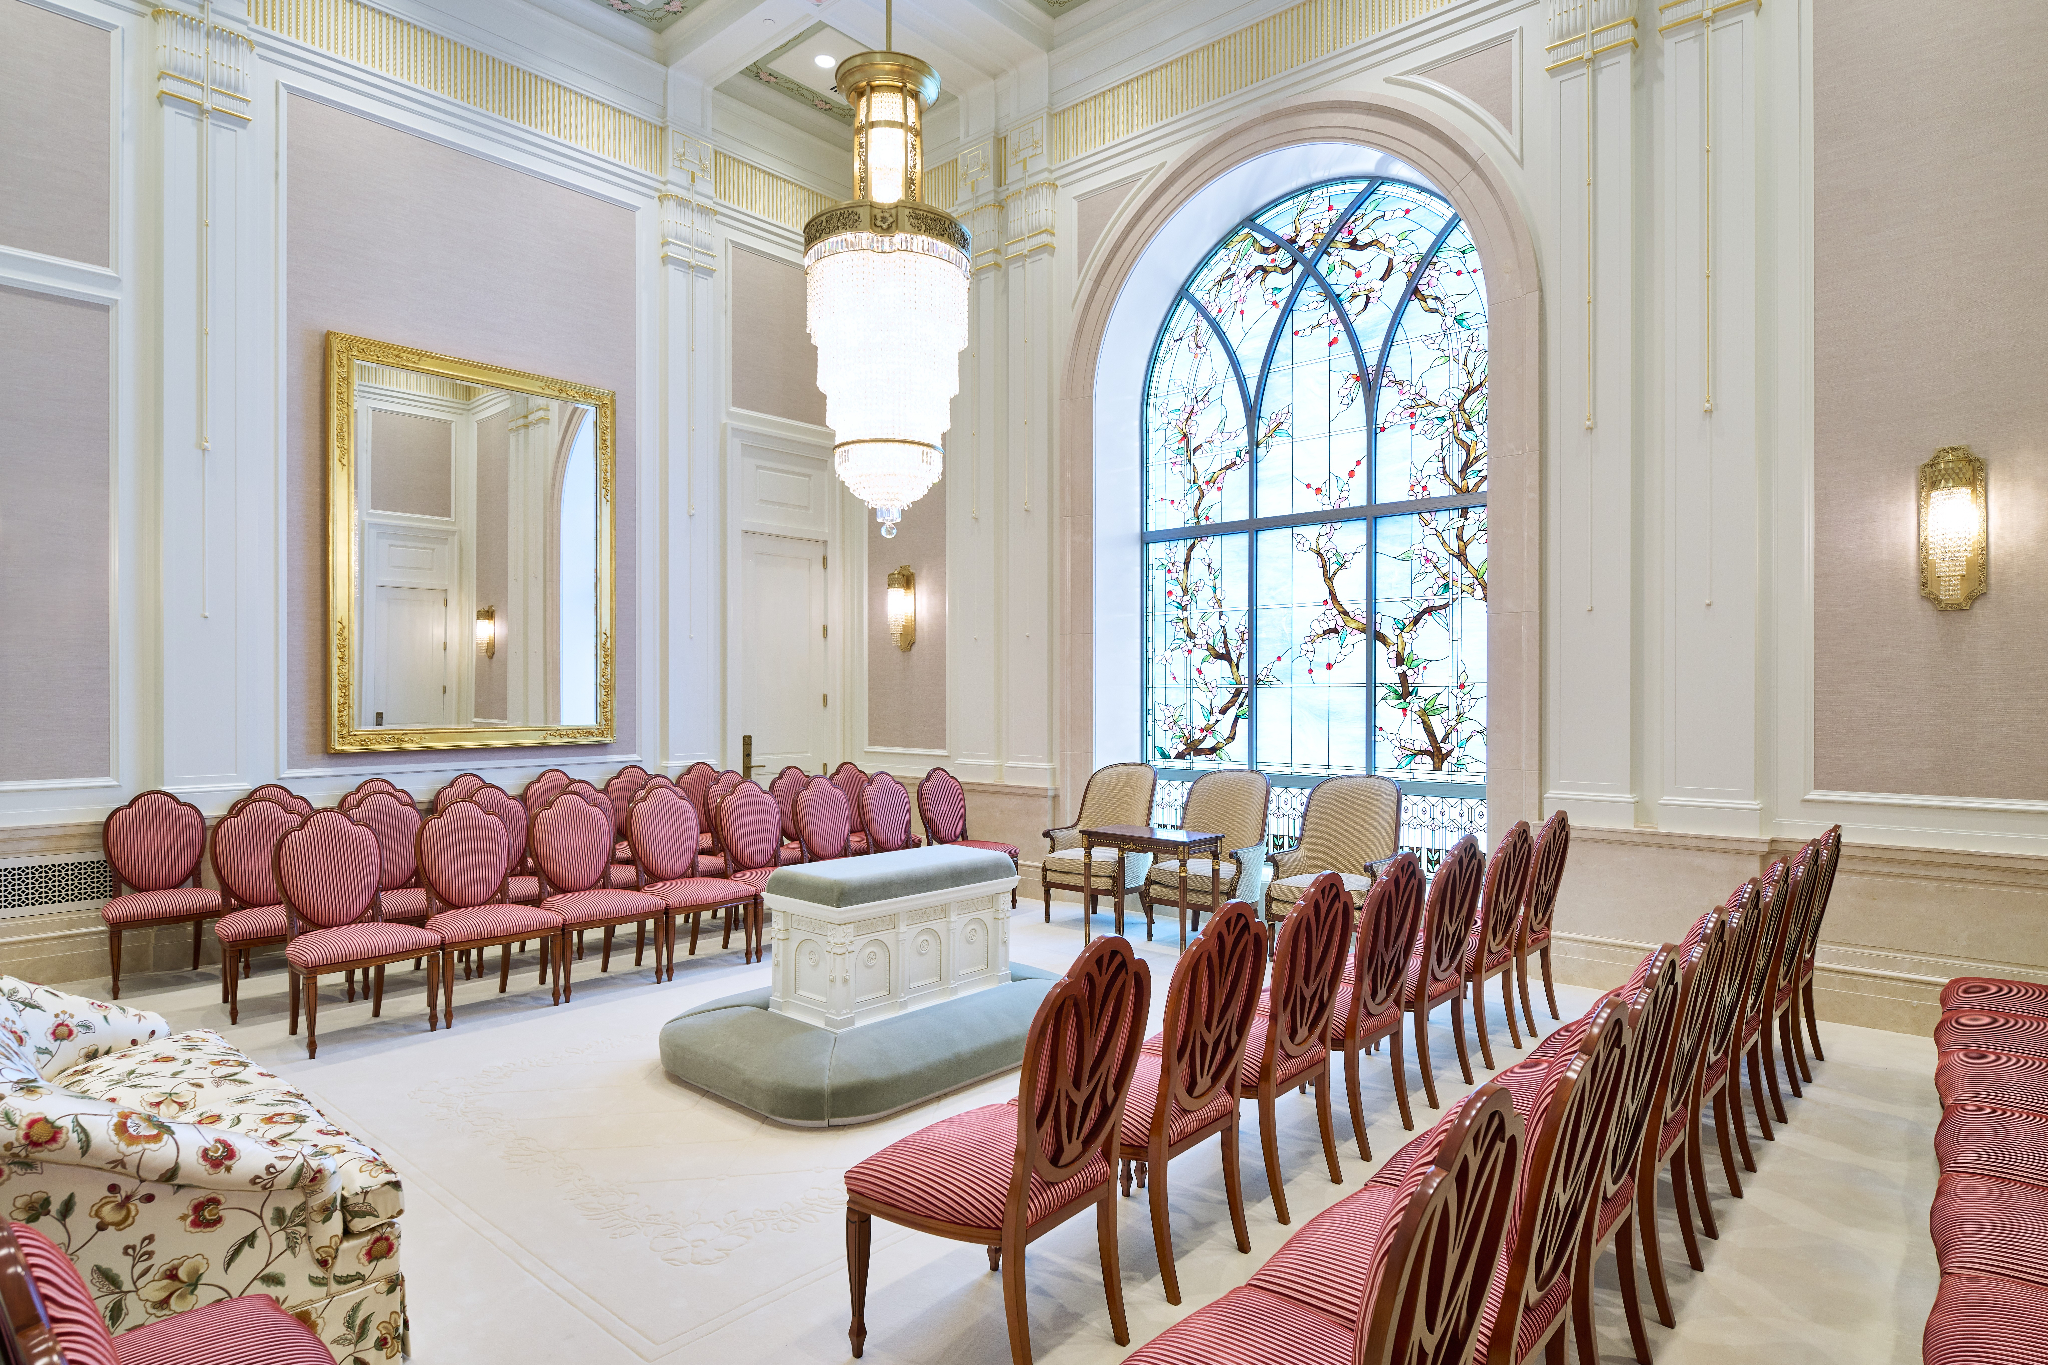 A white room with an altar in the center, with rows of light-red chairs on either side and a chandelier hanging from the ceiling.